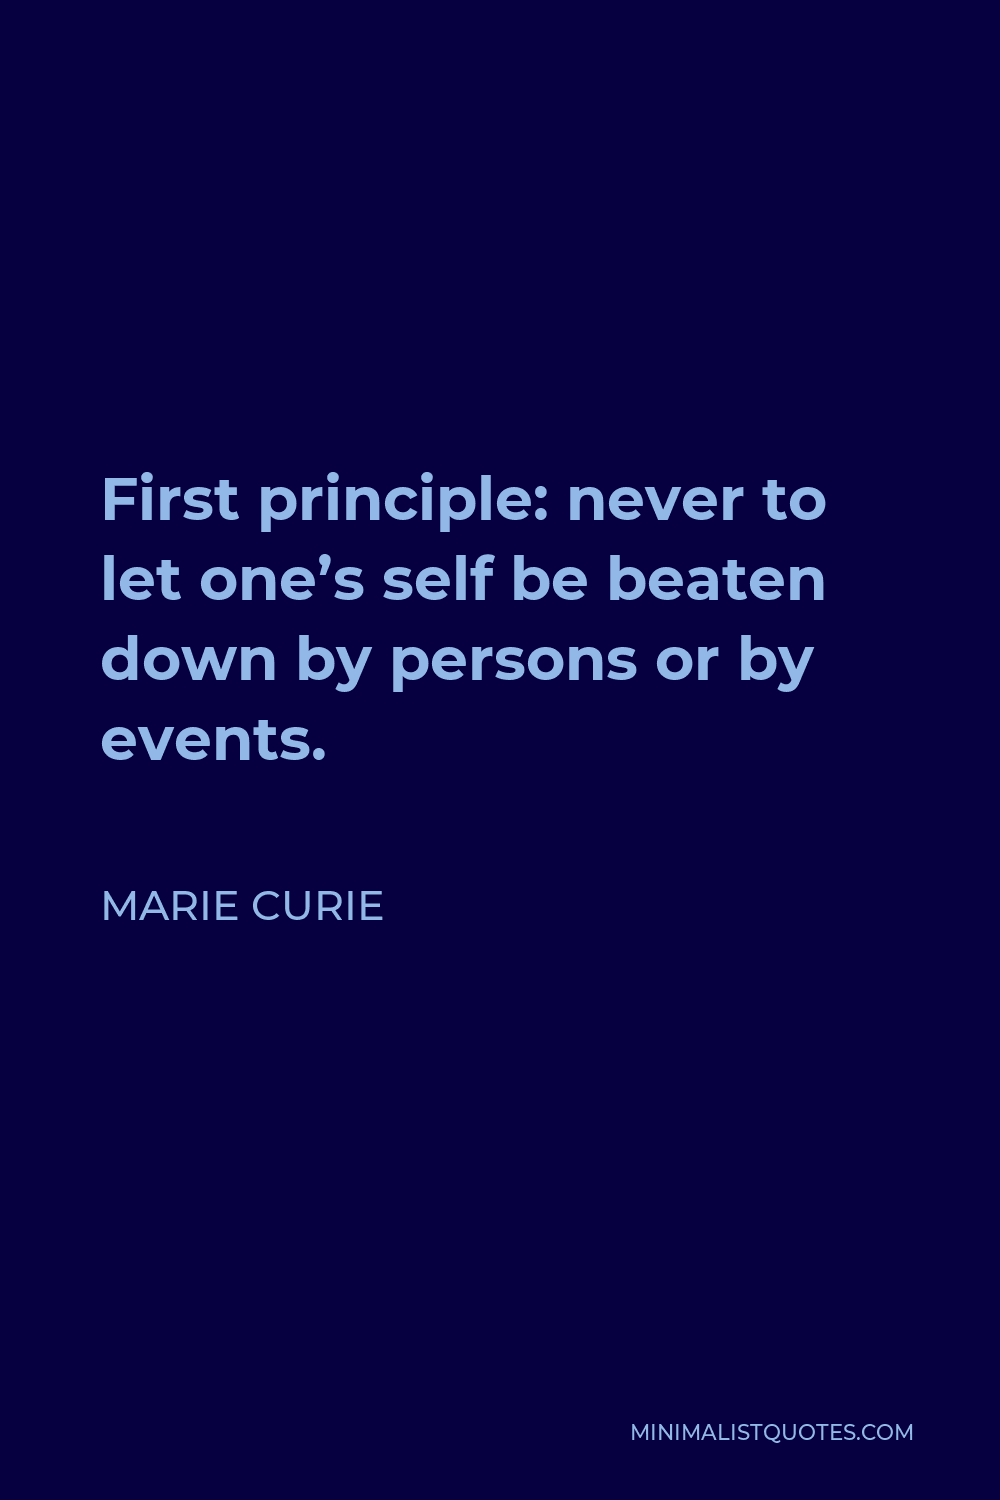 Marie Curie Quote - First principle: never to let one’s self be beaten down by persons or by events.